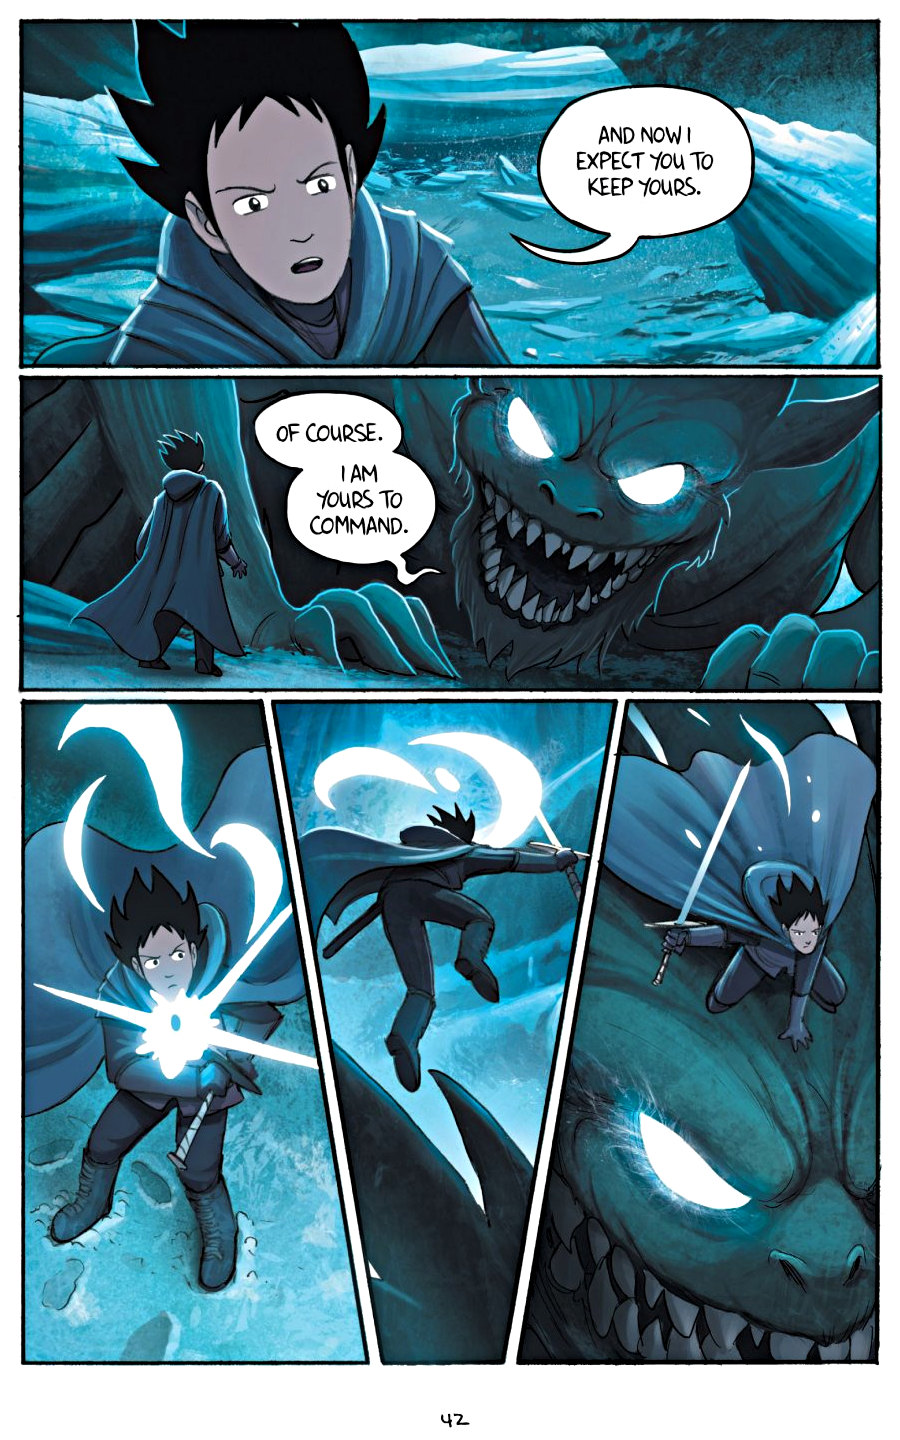 page 42 of amulet 5 prince of the elves graphic novel